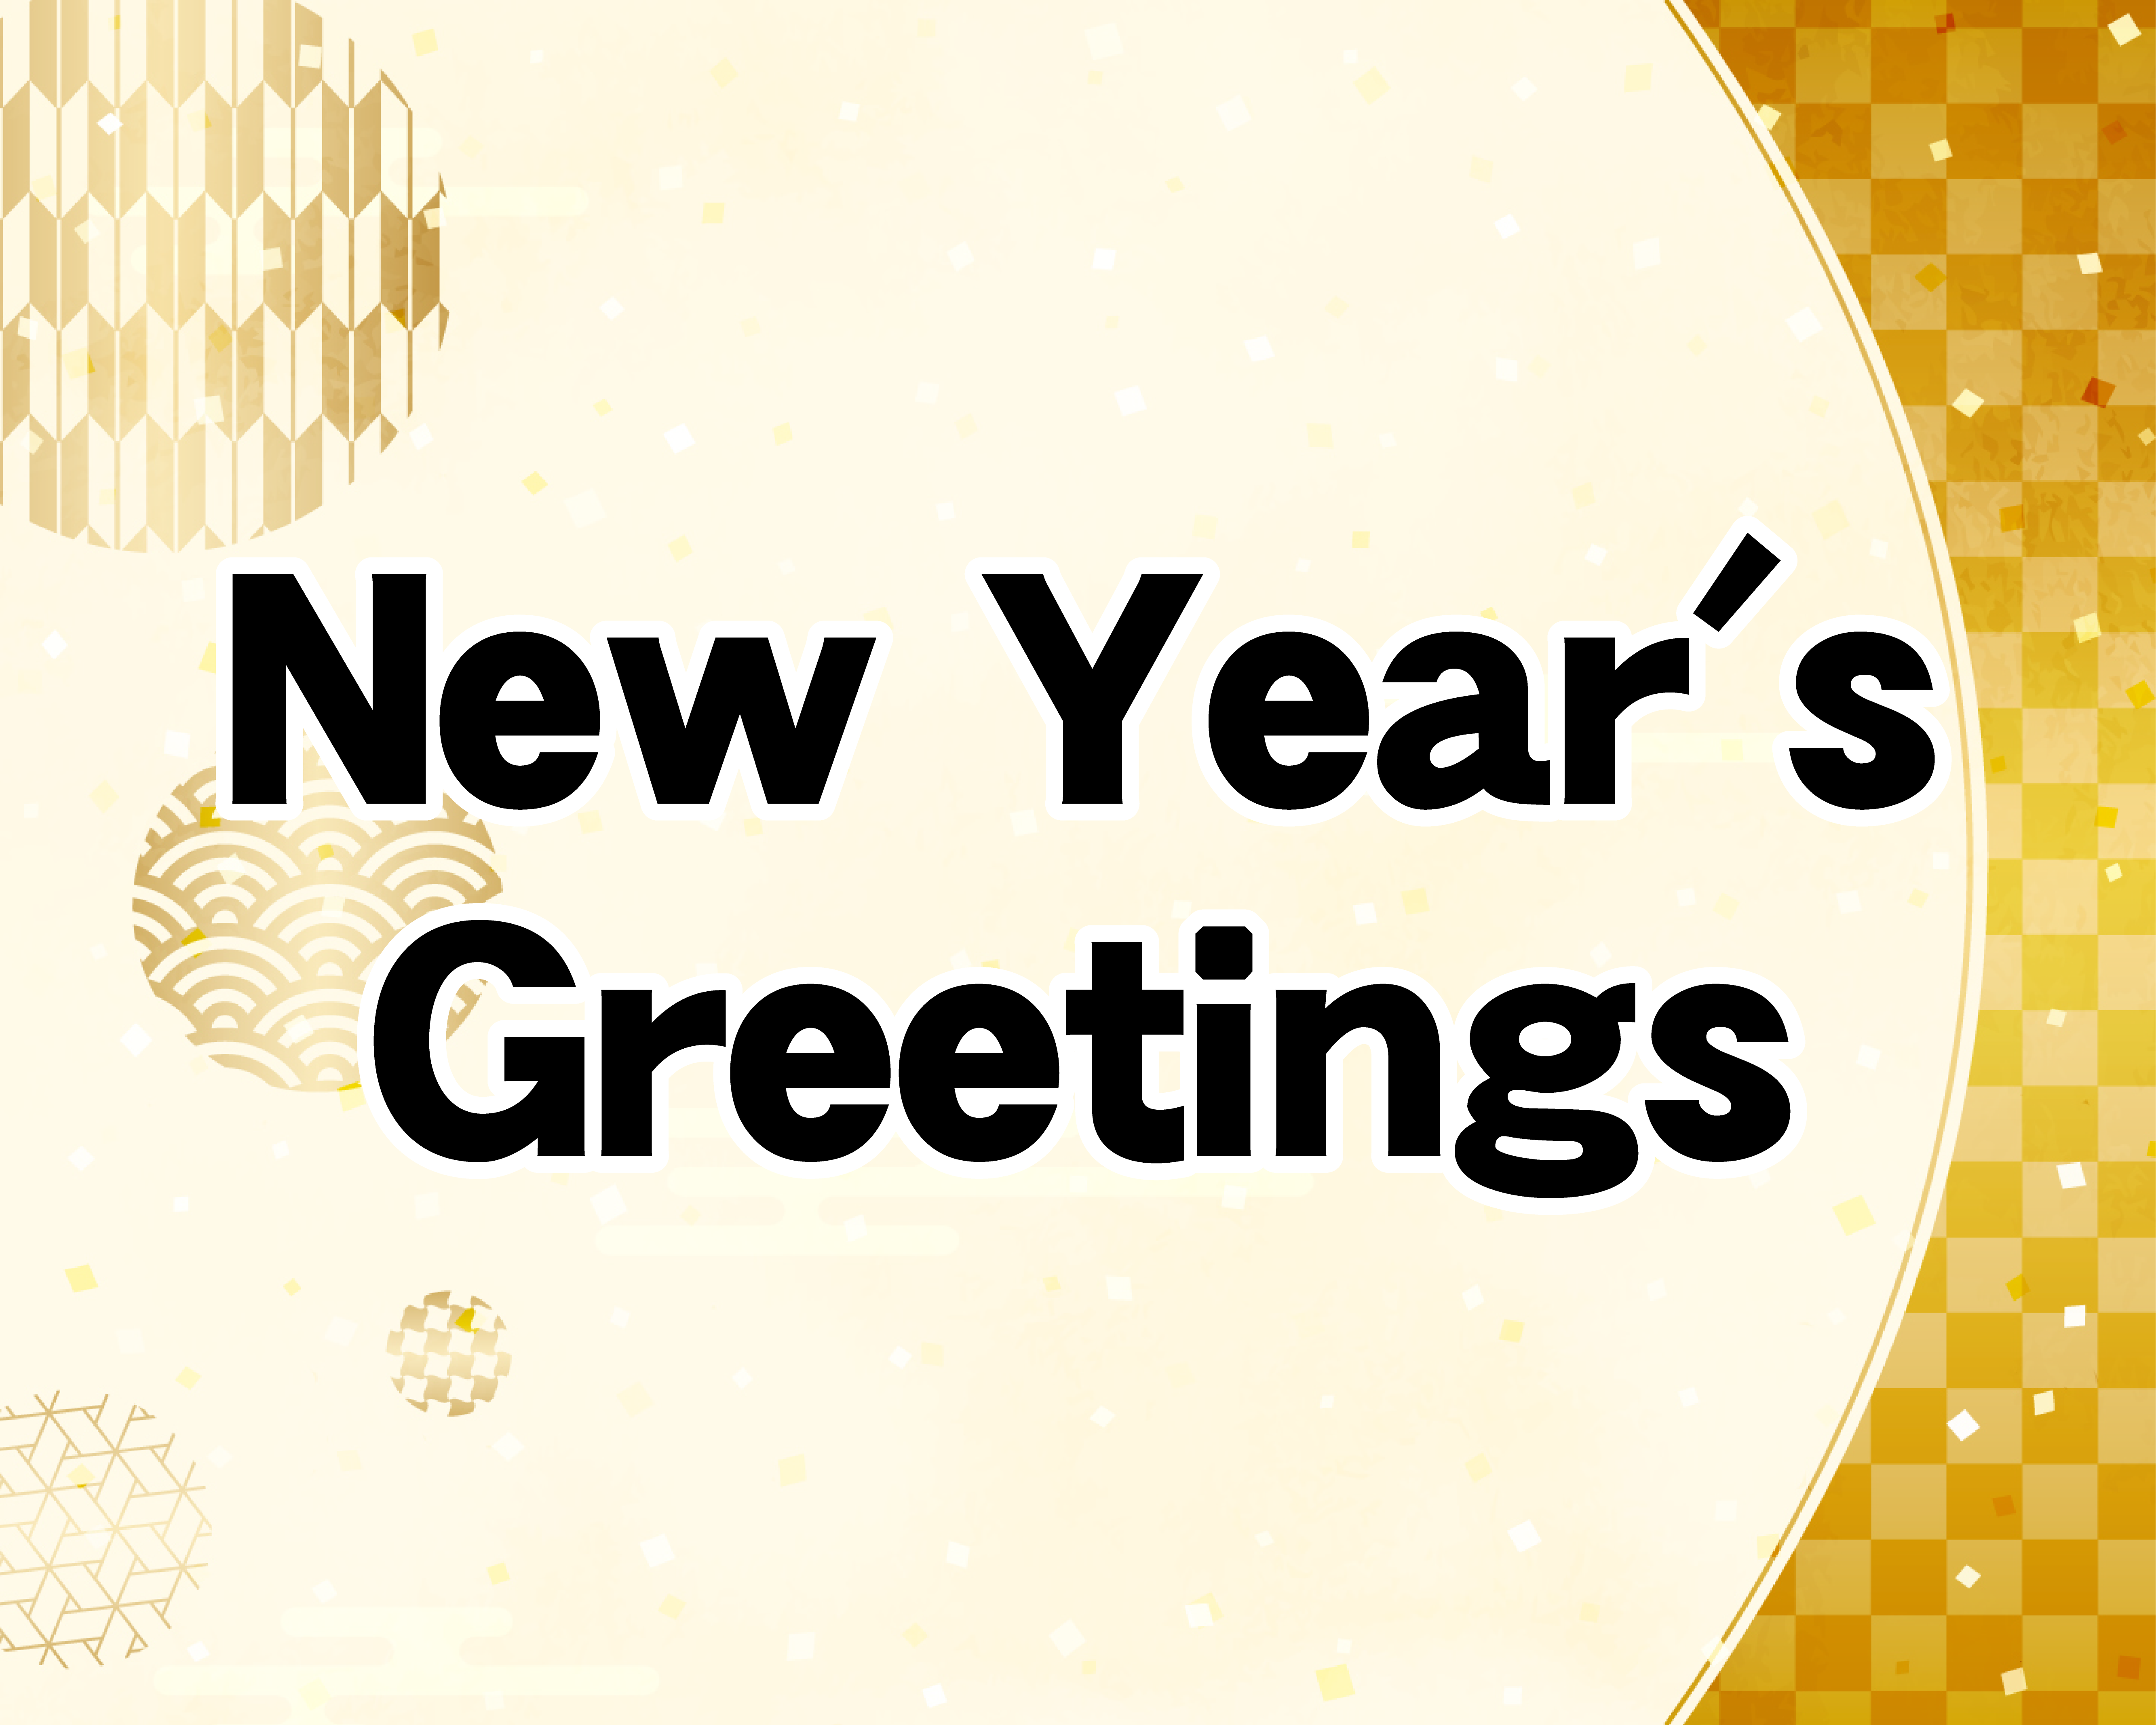 New Year’s Greetings from the Sales Department